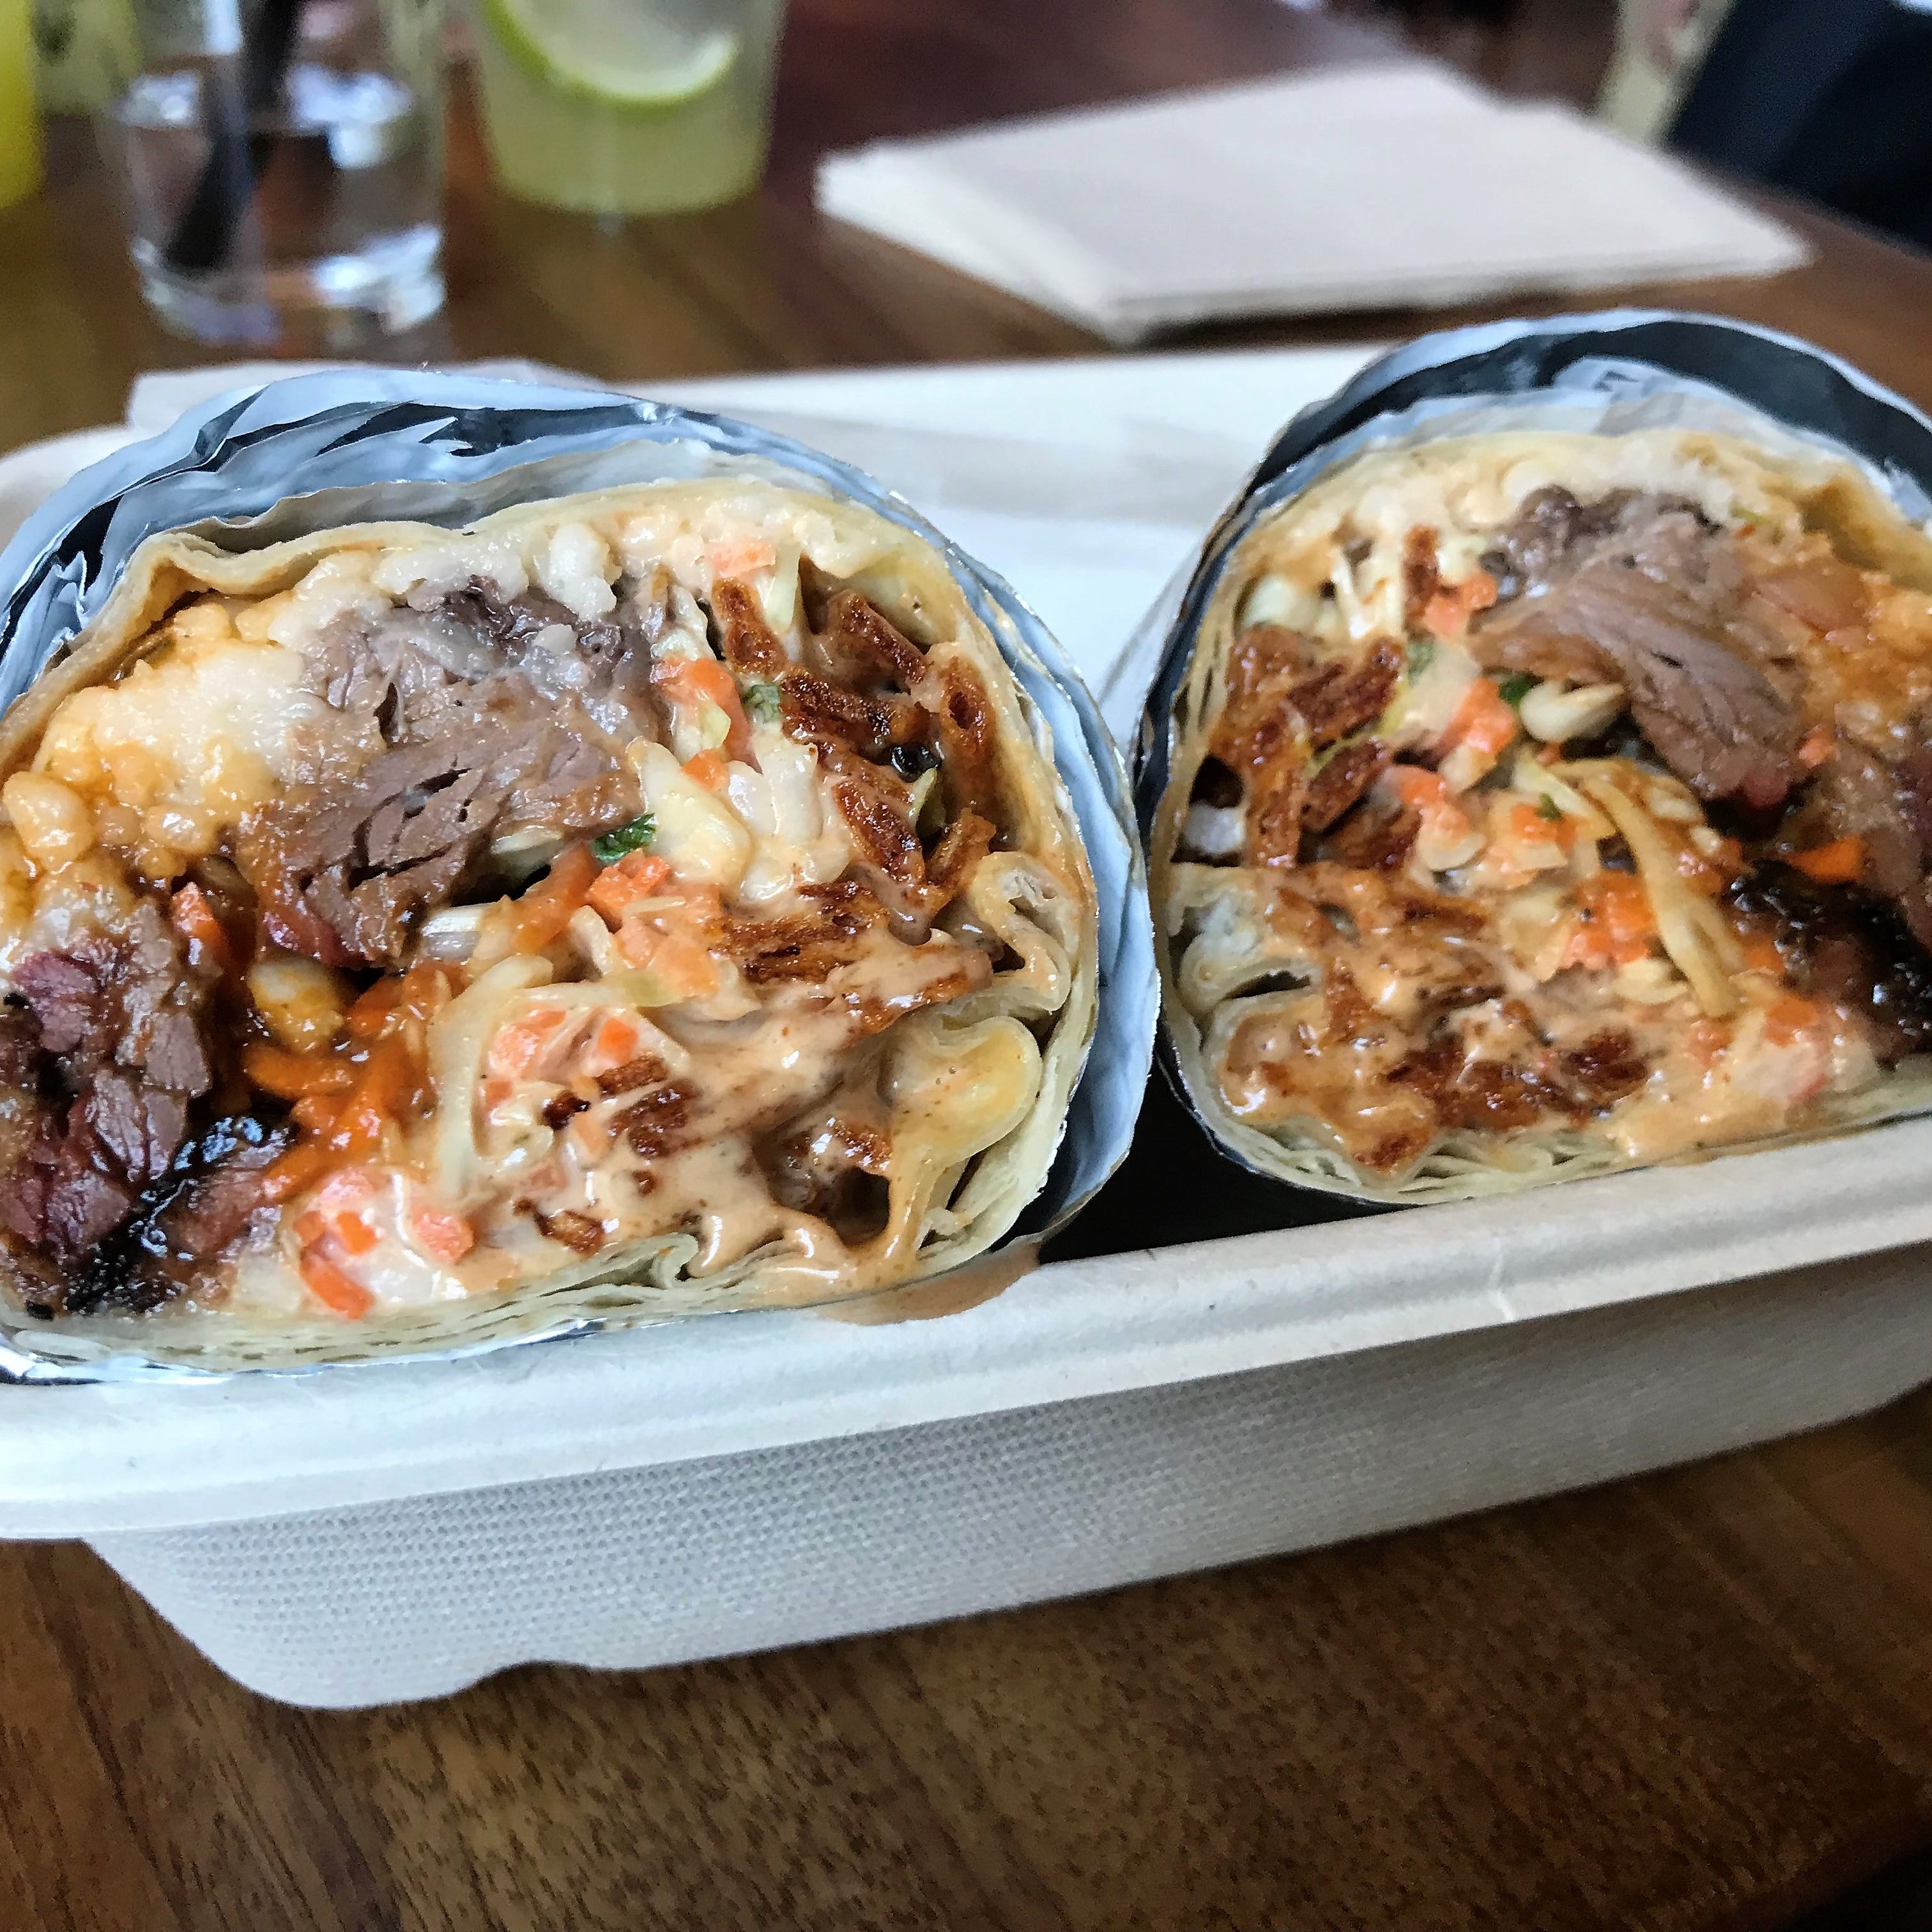 The exceptional burnt ends burrito is stuffed with authentic beef brisket burnt ends, chipotle cole slaw, manchego cheese and crunchy fried potato strings.